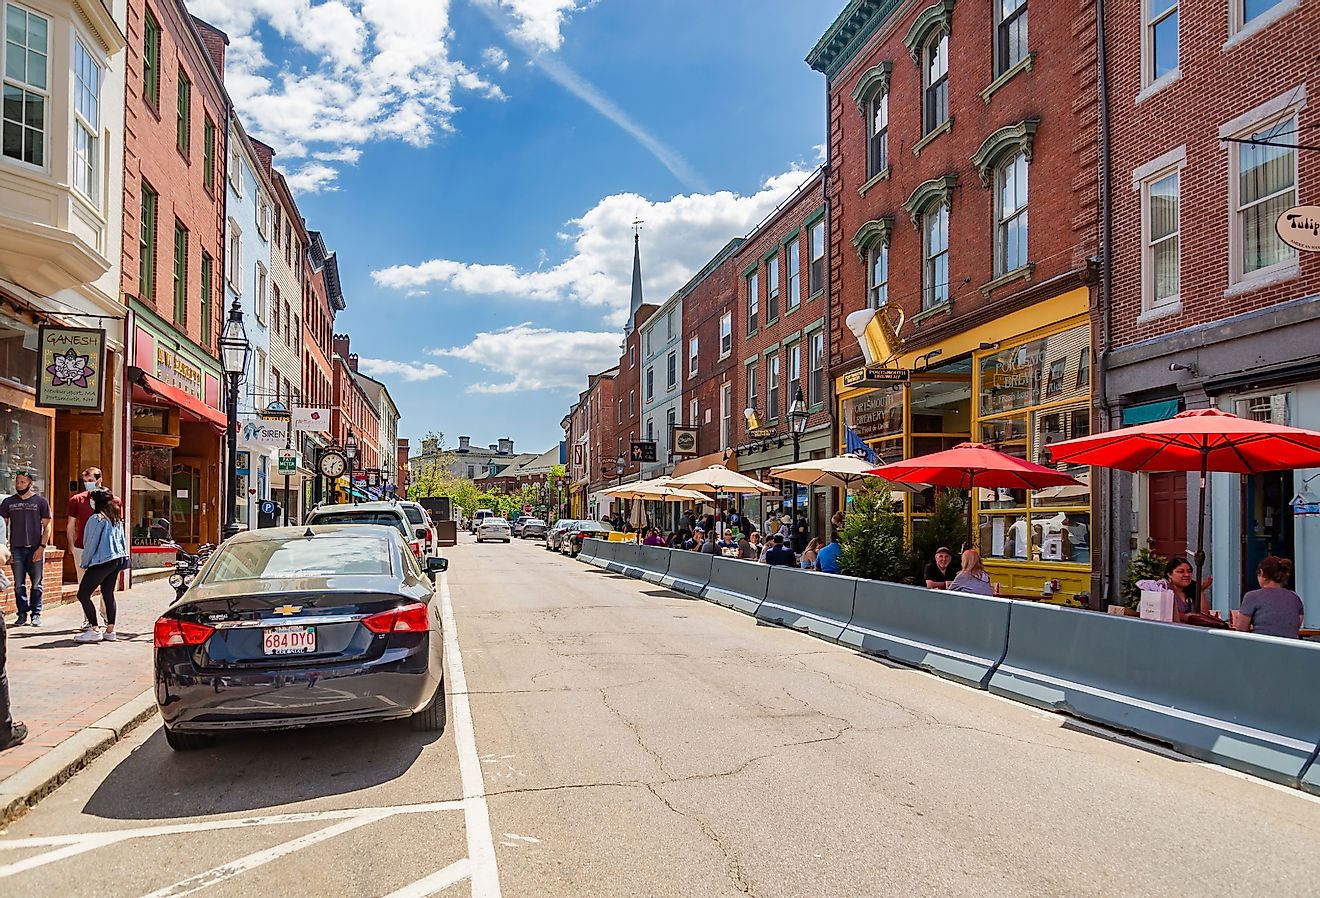 Street and old buildings in downtown Portsmouth, New Hampshire in the spring. Image credit Enrico Della Pietra via Shutterstock